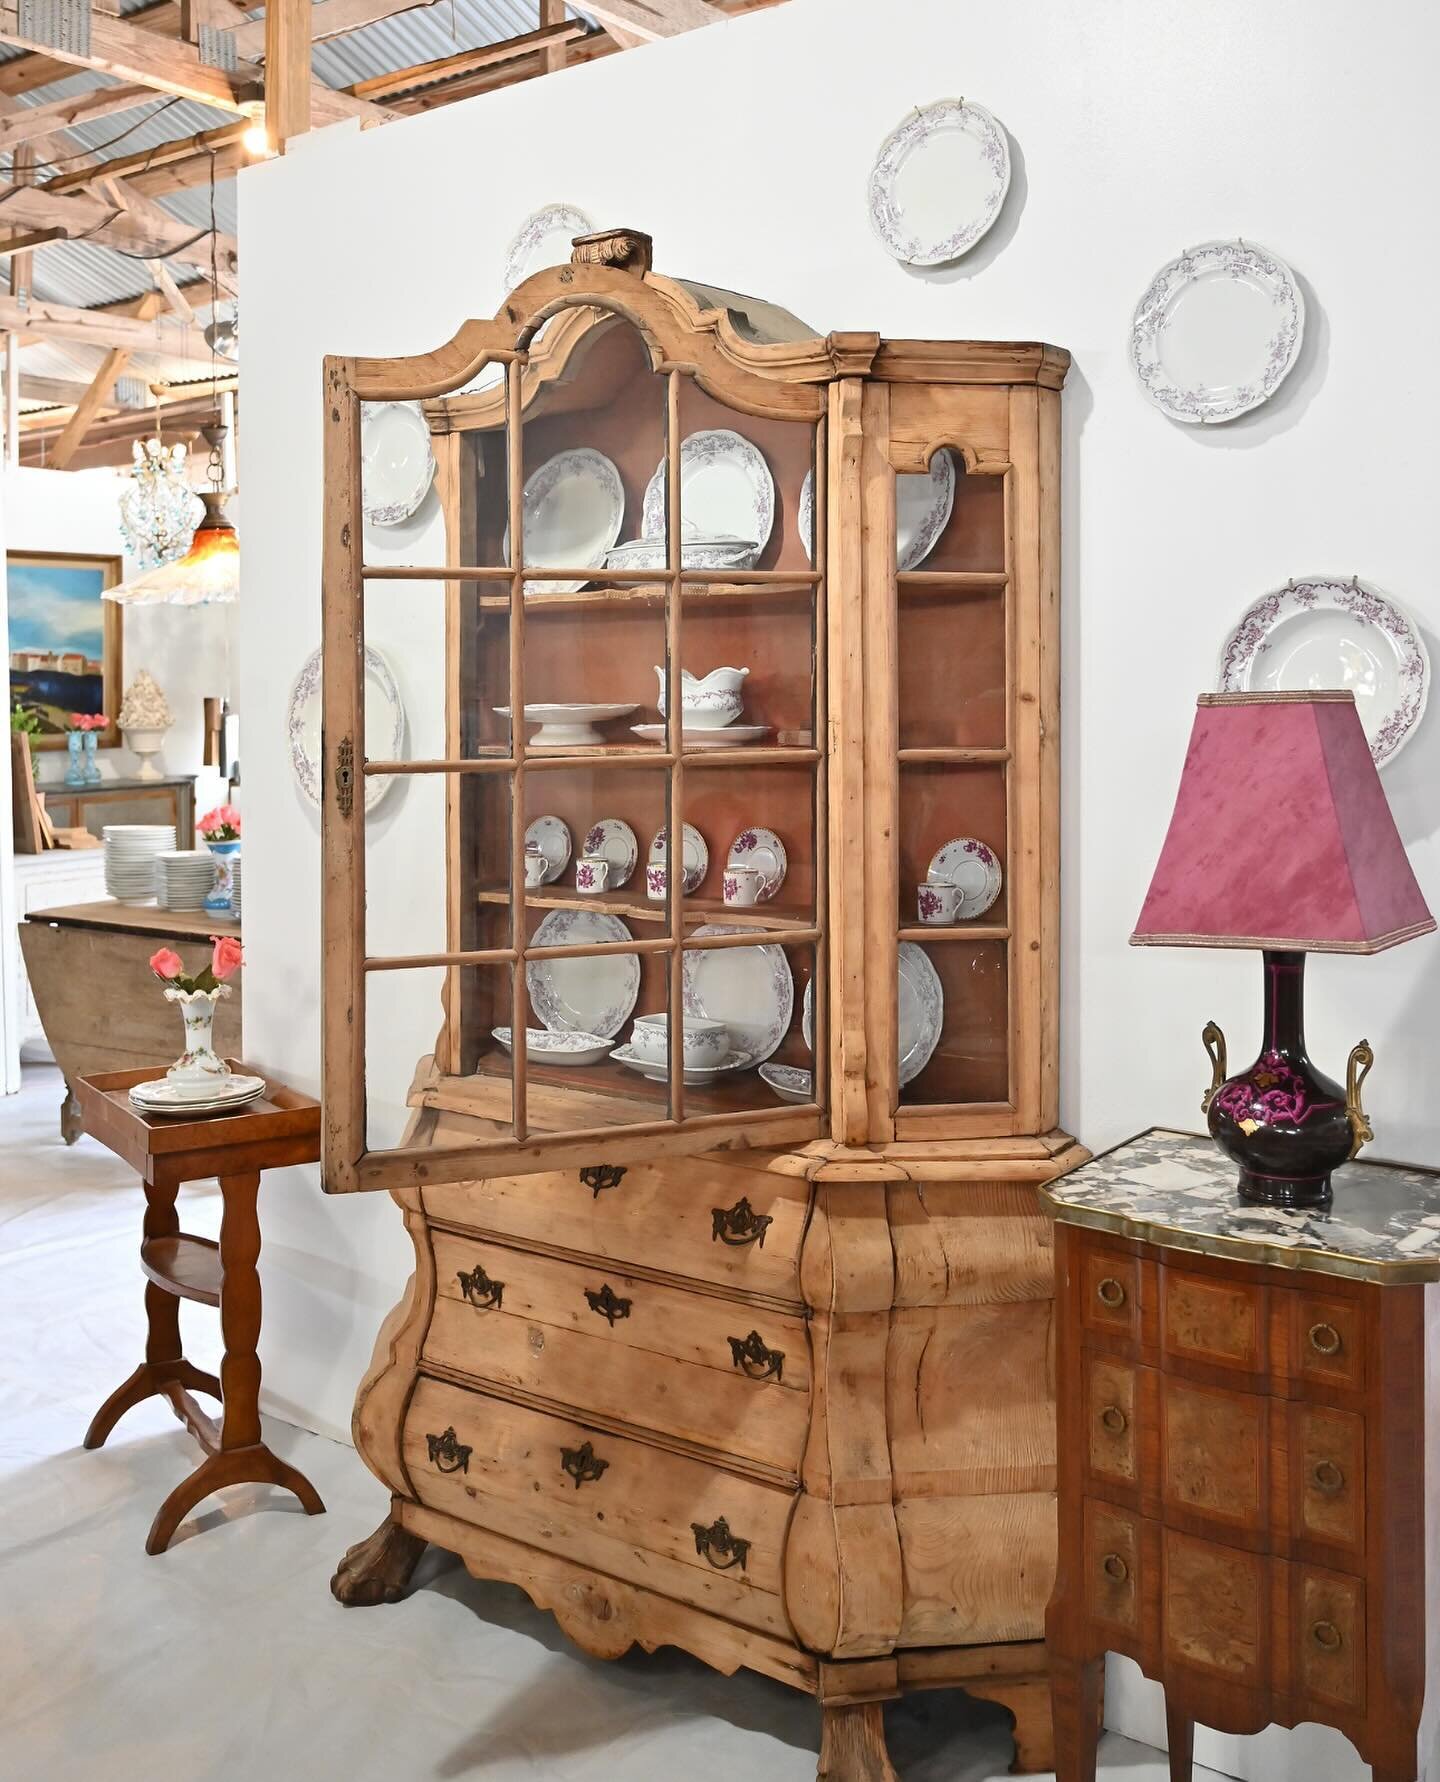 The most beautiful Dutch vitrine that I&rsquo;ve seen in many years. A petite, delightful shape with original glass door to house the most delicate of treasures. Perfect for kitchen or bath, dining or entry. Available now in our beautiful showroom @b